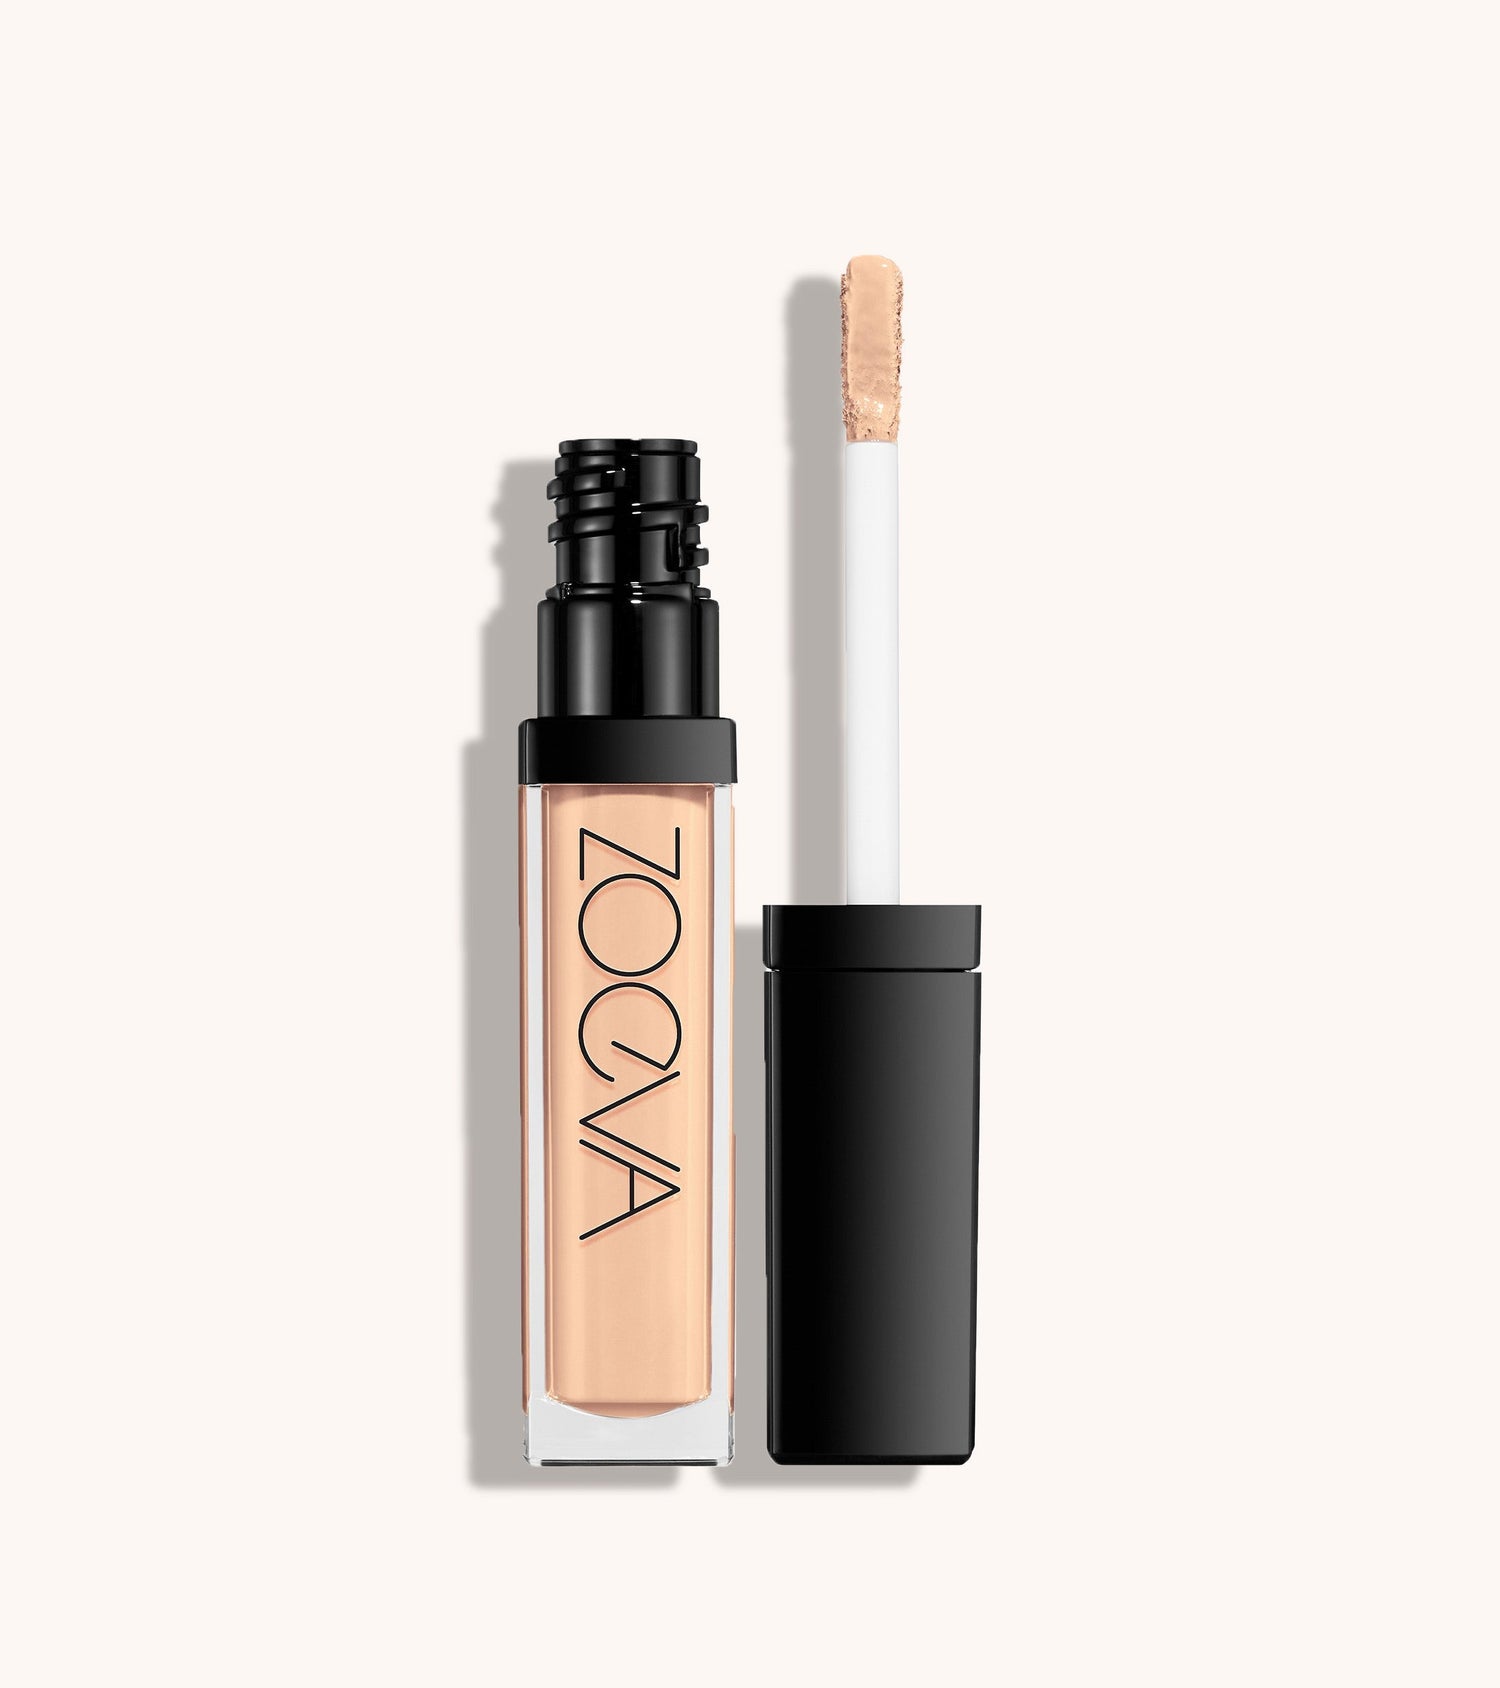 Authentik Skin Perfector Concealer (020 Accurate) Main Image featured